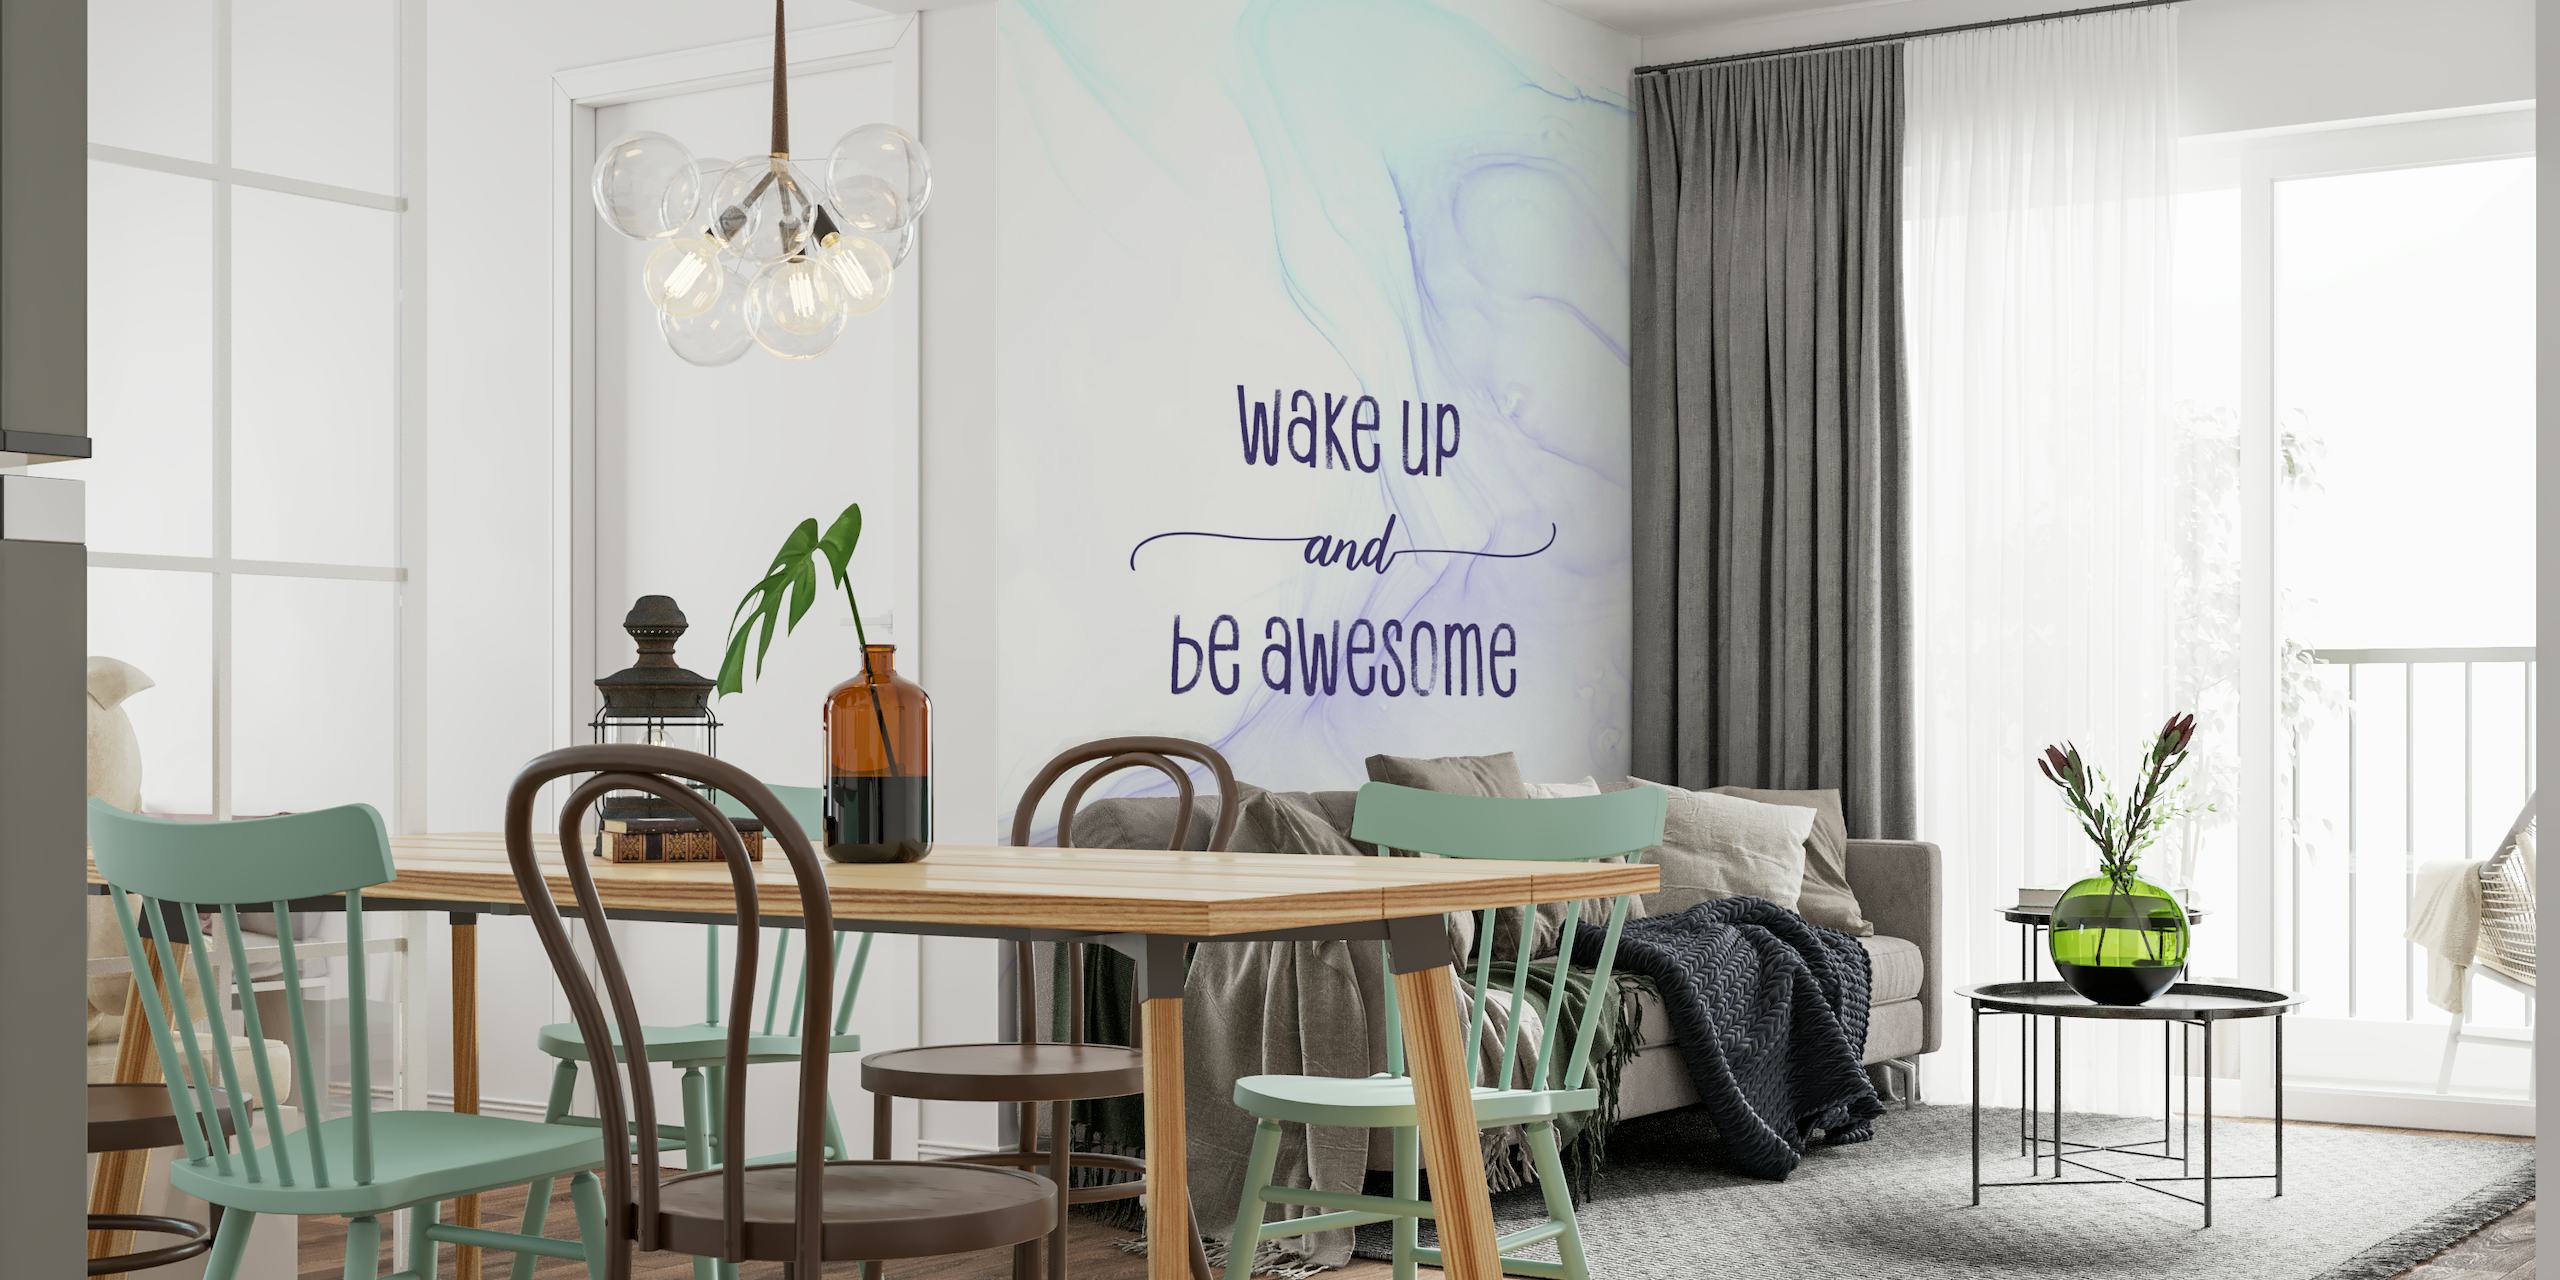 Wake up and be awesome papel de parede